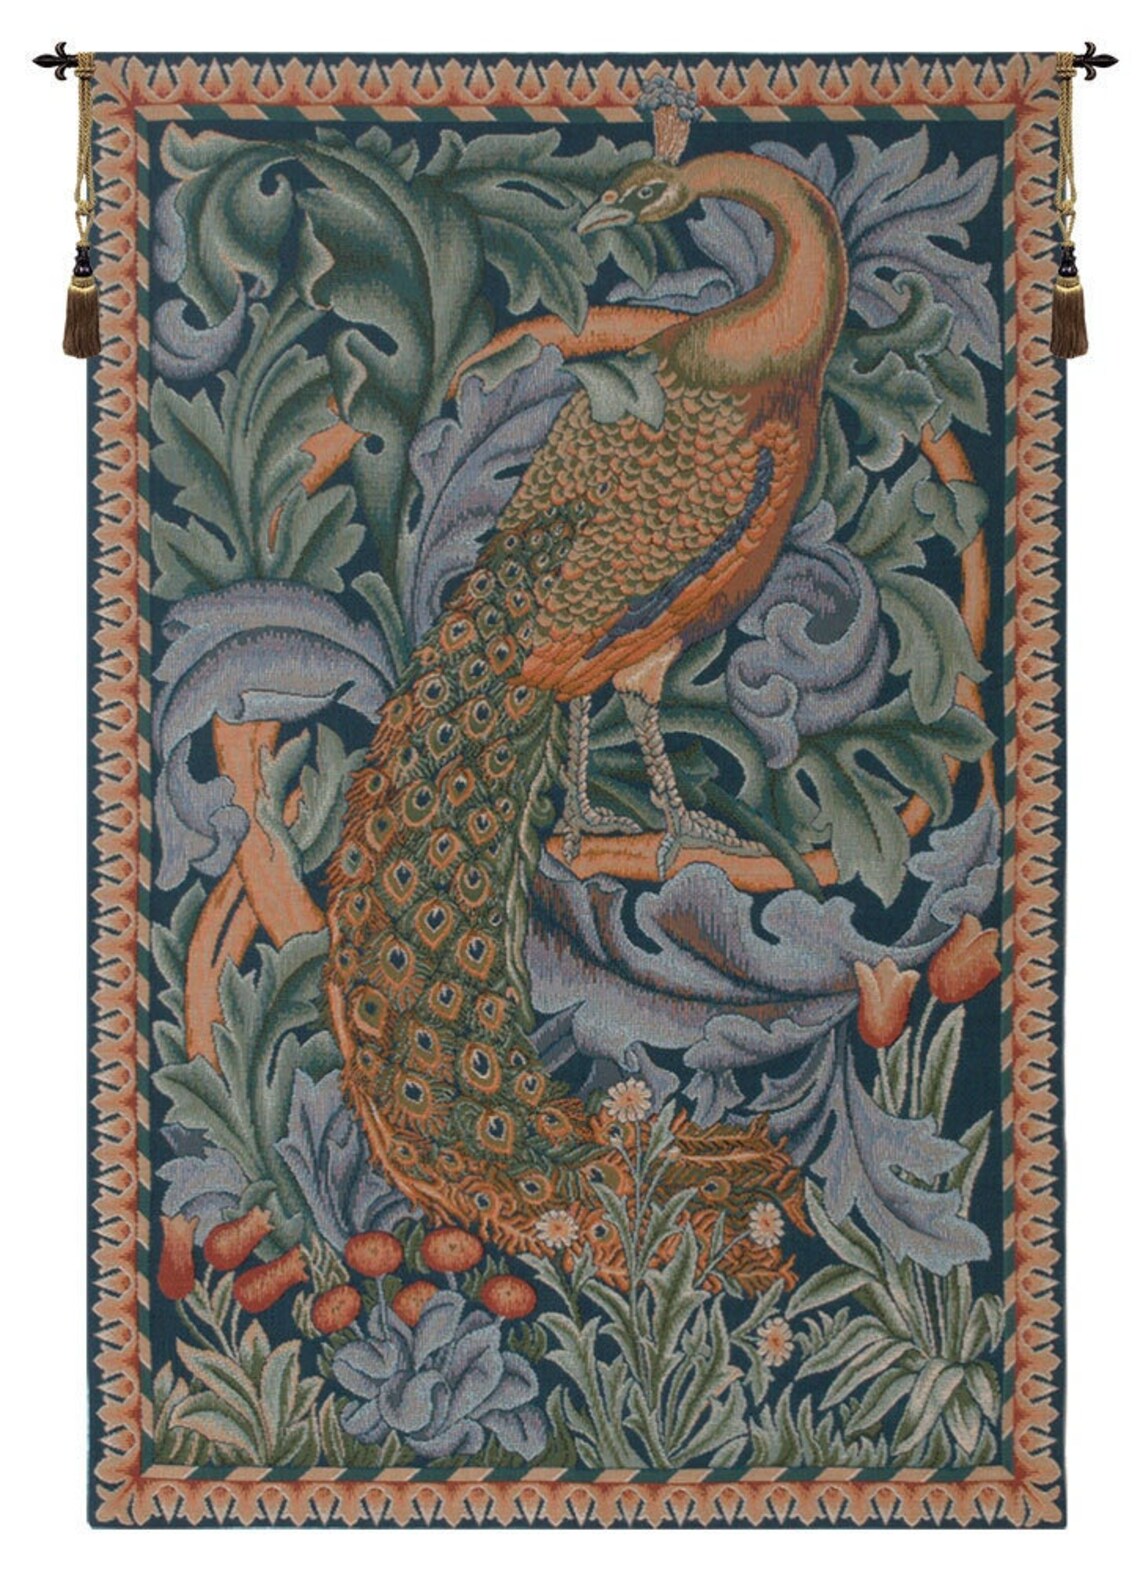 Peacock William Morris Tapestry Wall Hanging Jacquard Woven - Etsy